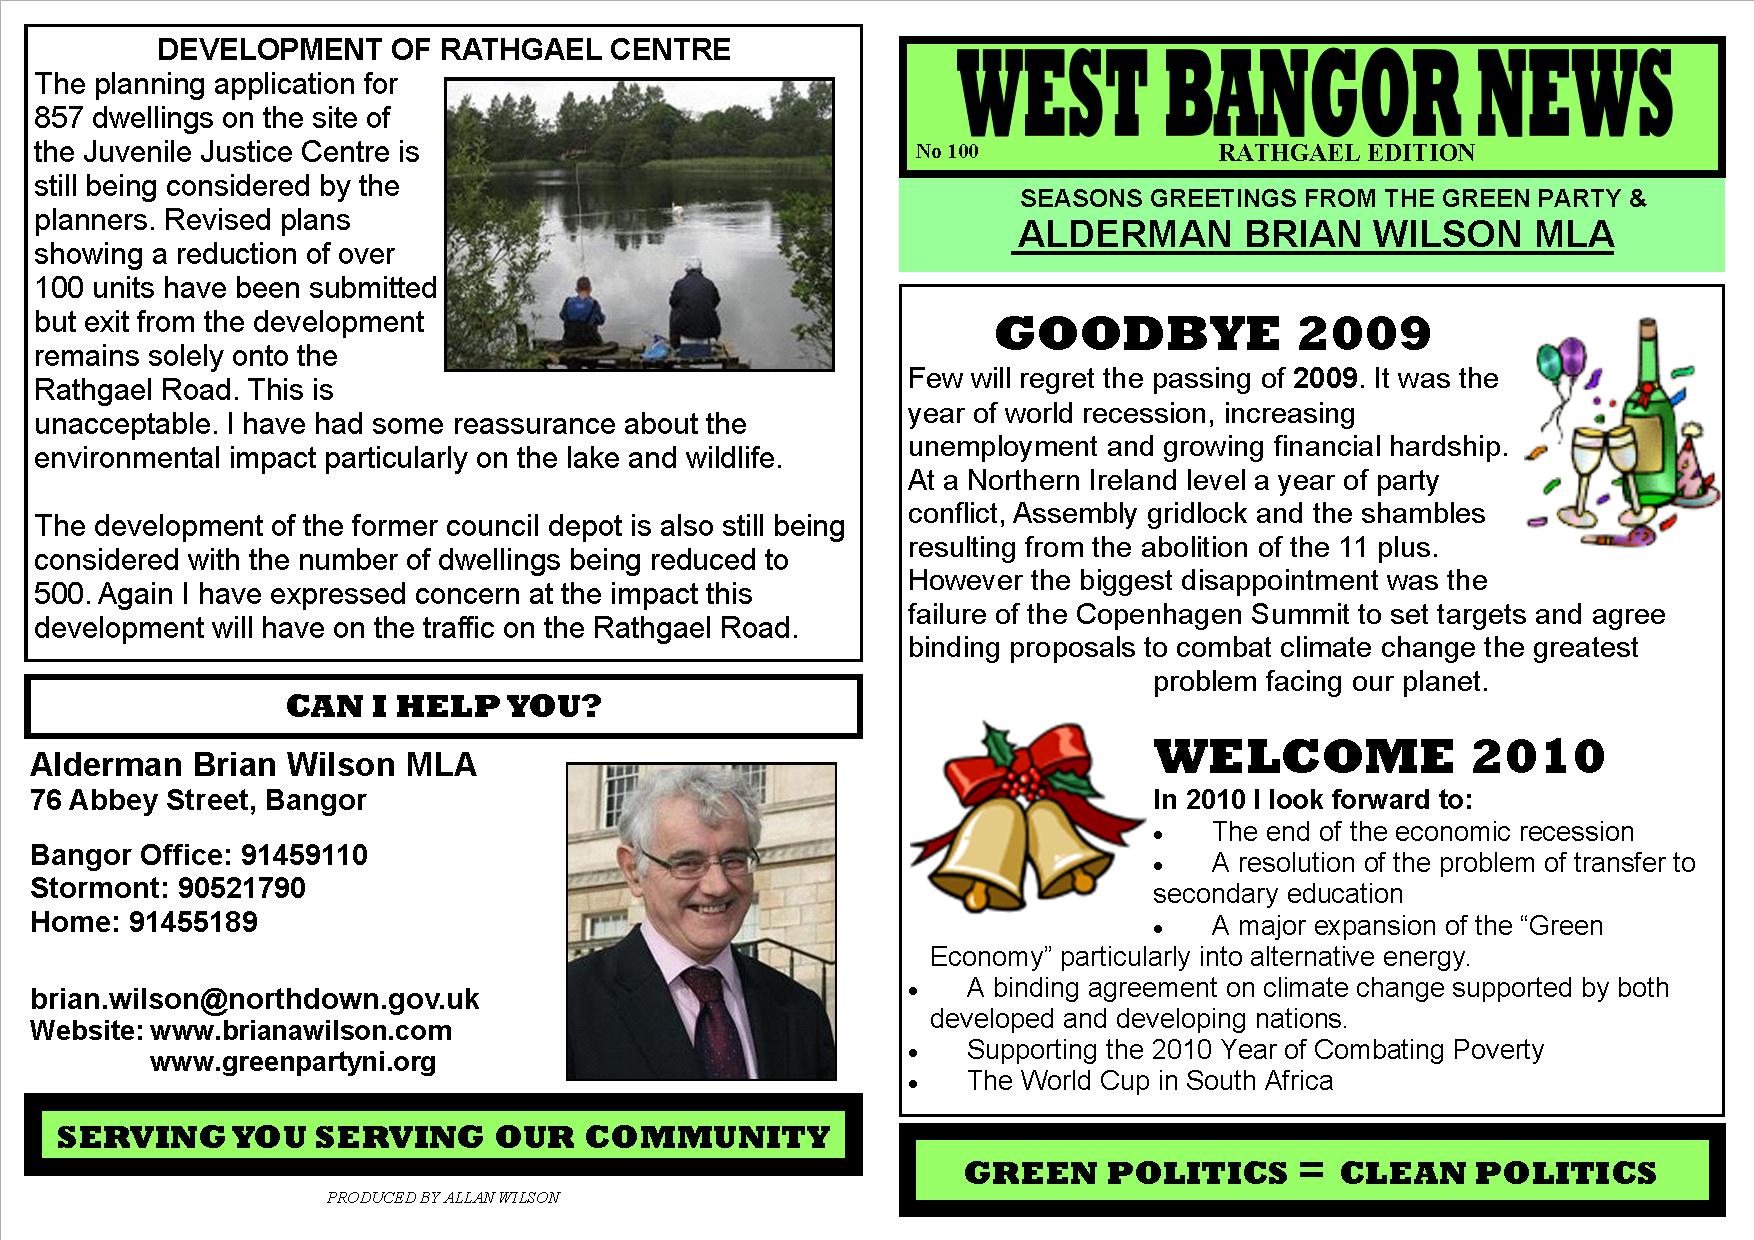 West Bangor News (100) - New Year 2010. Brian Wilson North Down Councillor, first Green Party MLA in Northern Ireland